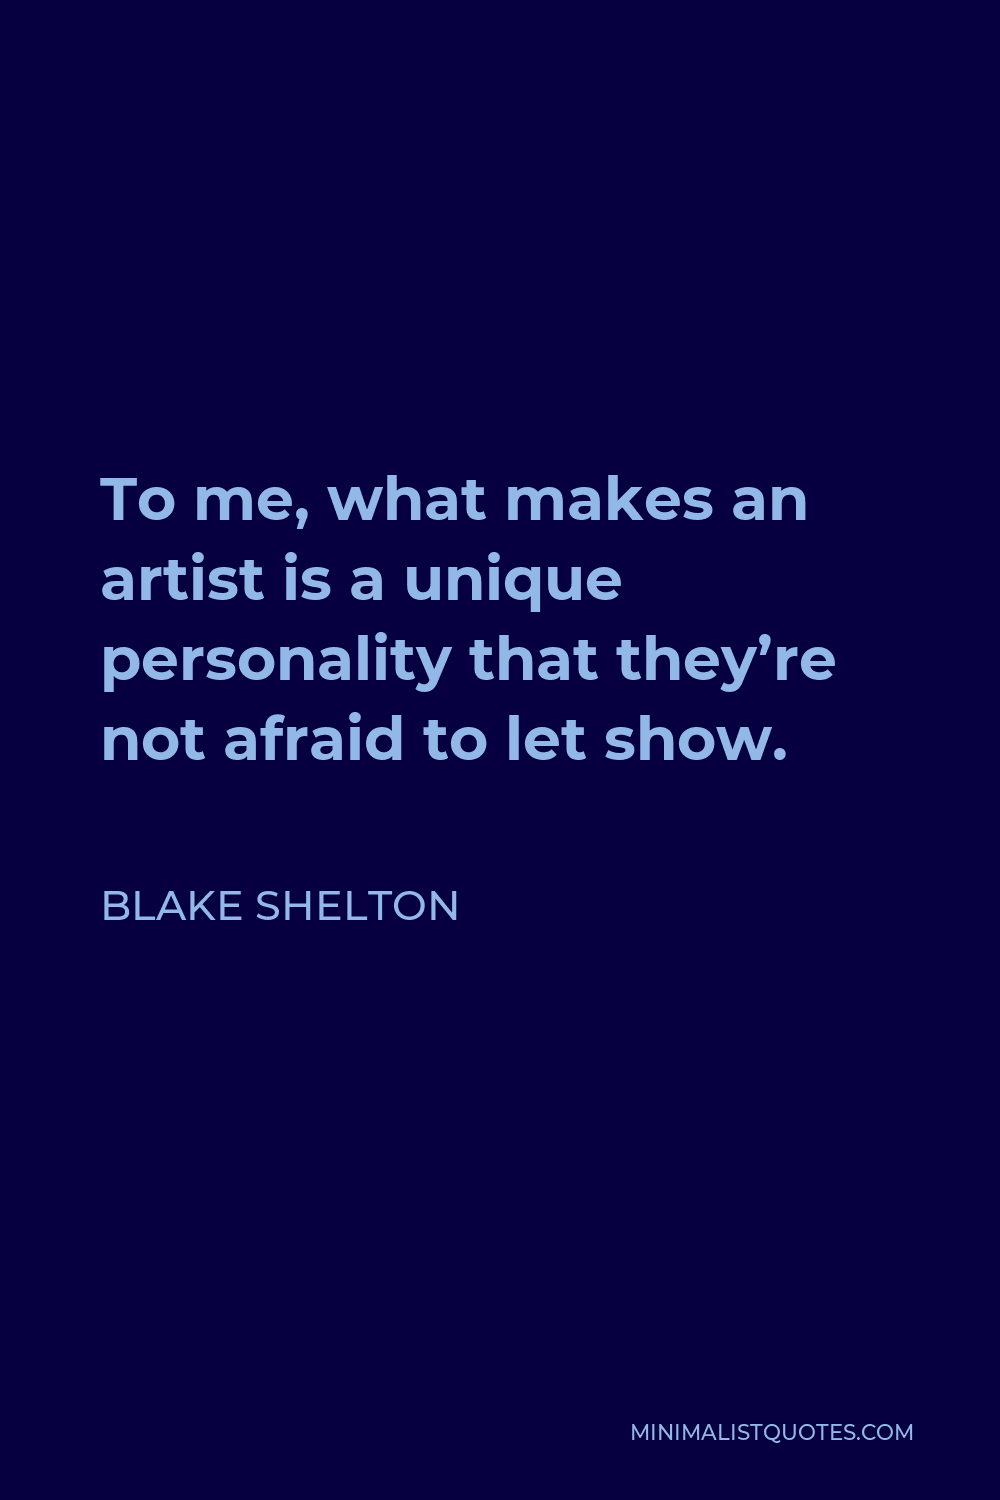 Blake Shelton Quote - To me, what makes an artist is a unique personality that they’re not afraid to let show.